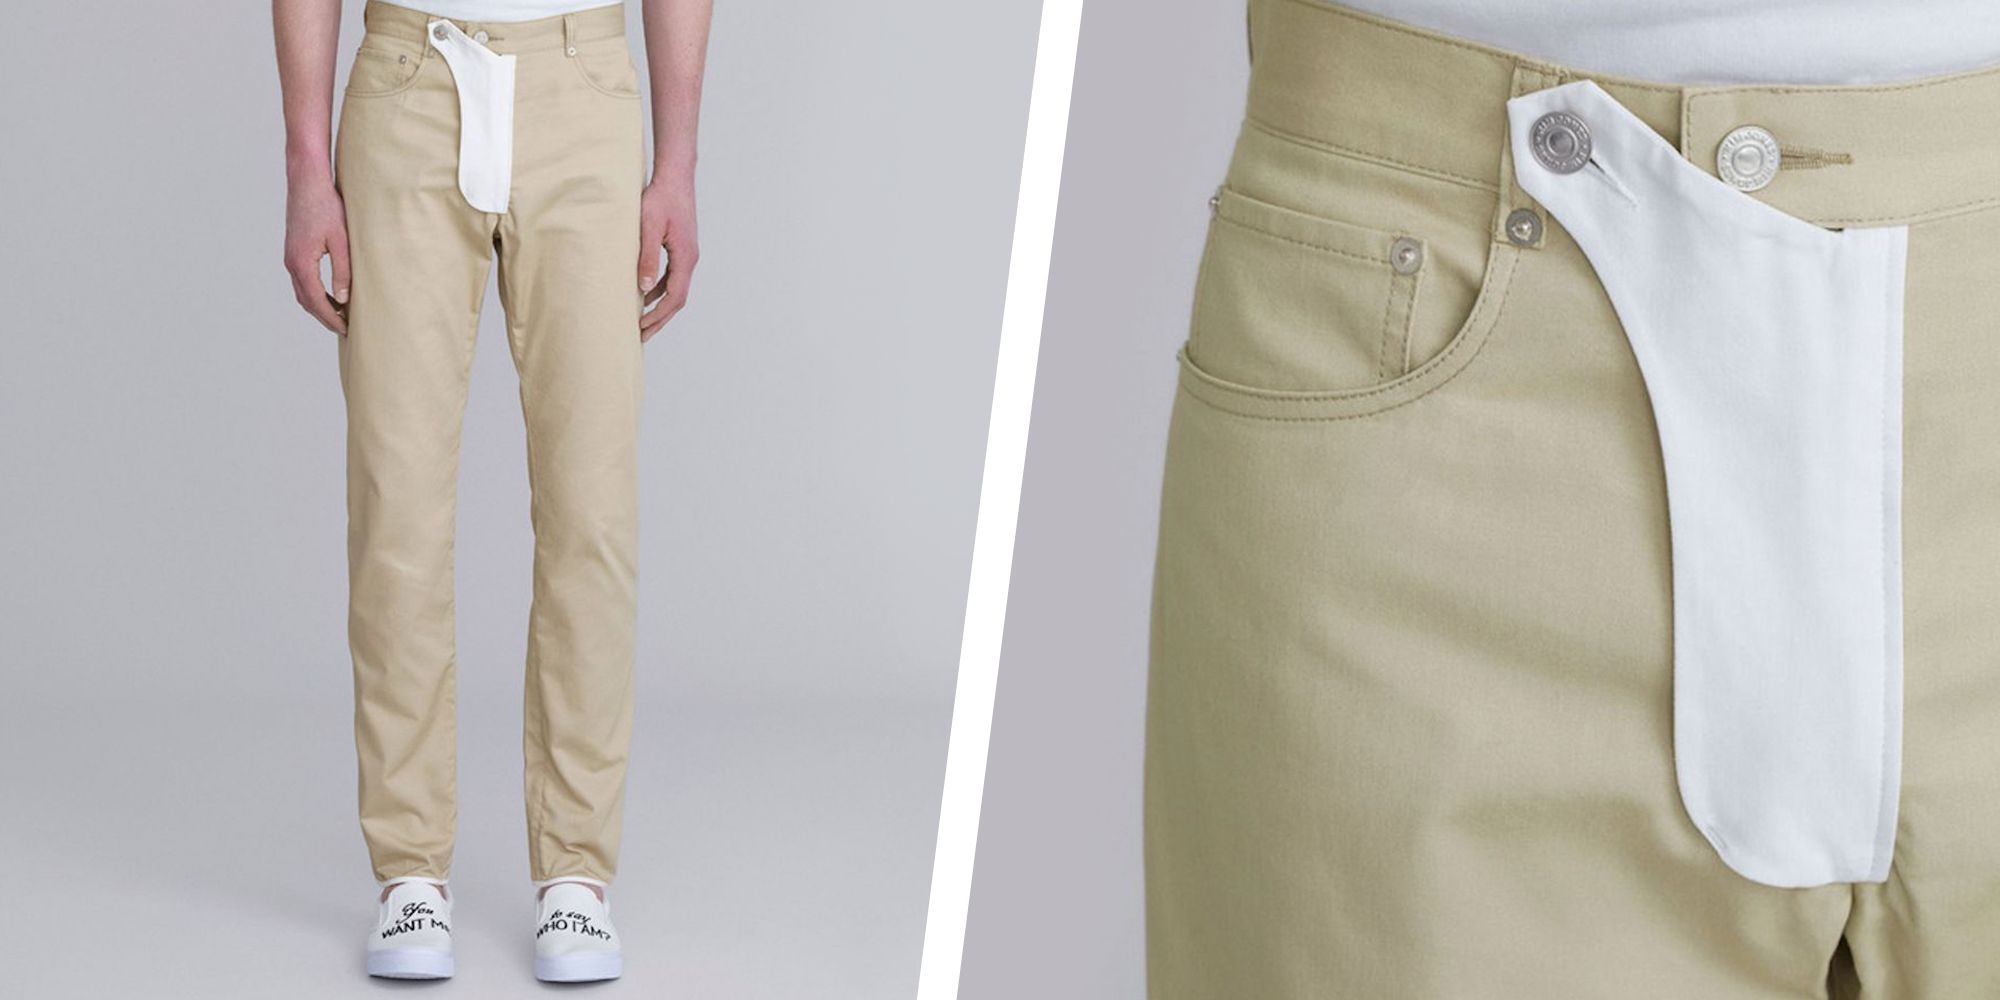 How These Unlikely Pants Became the New J.Crew's First Big Hit | GQ